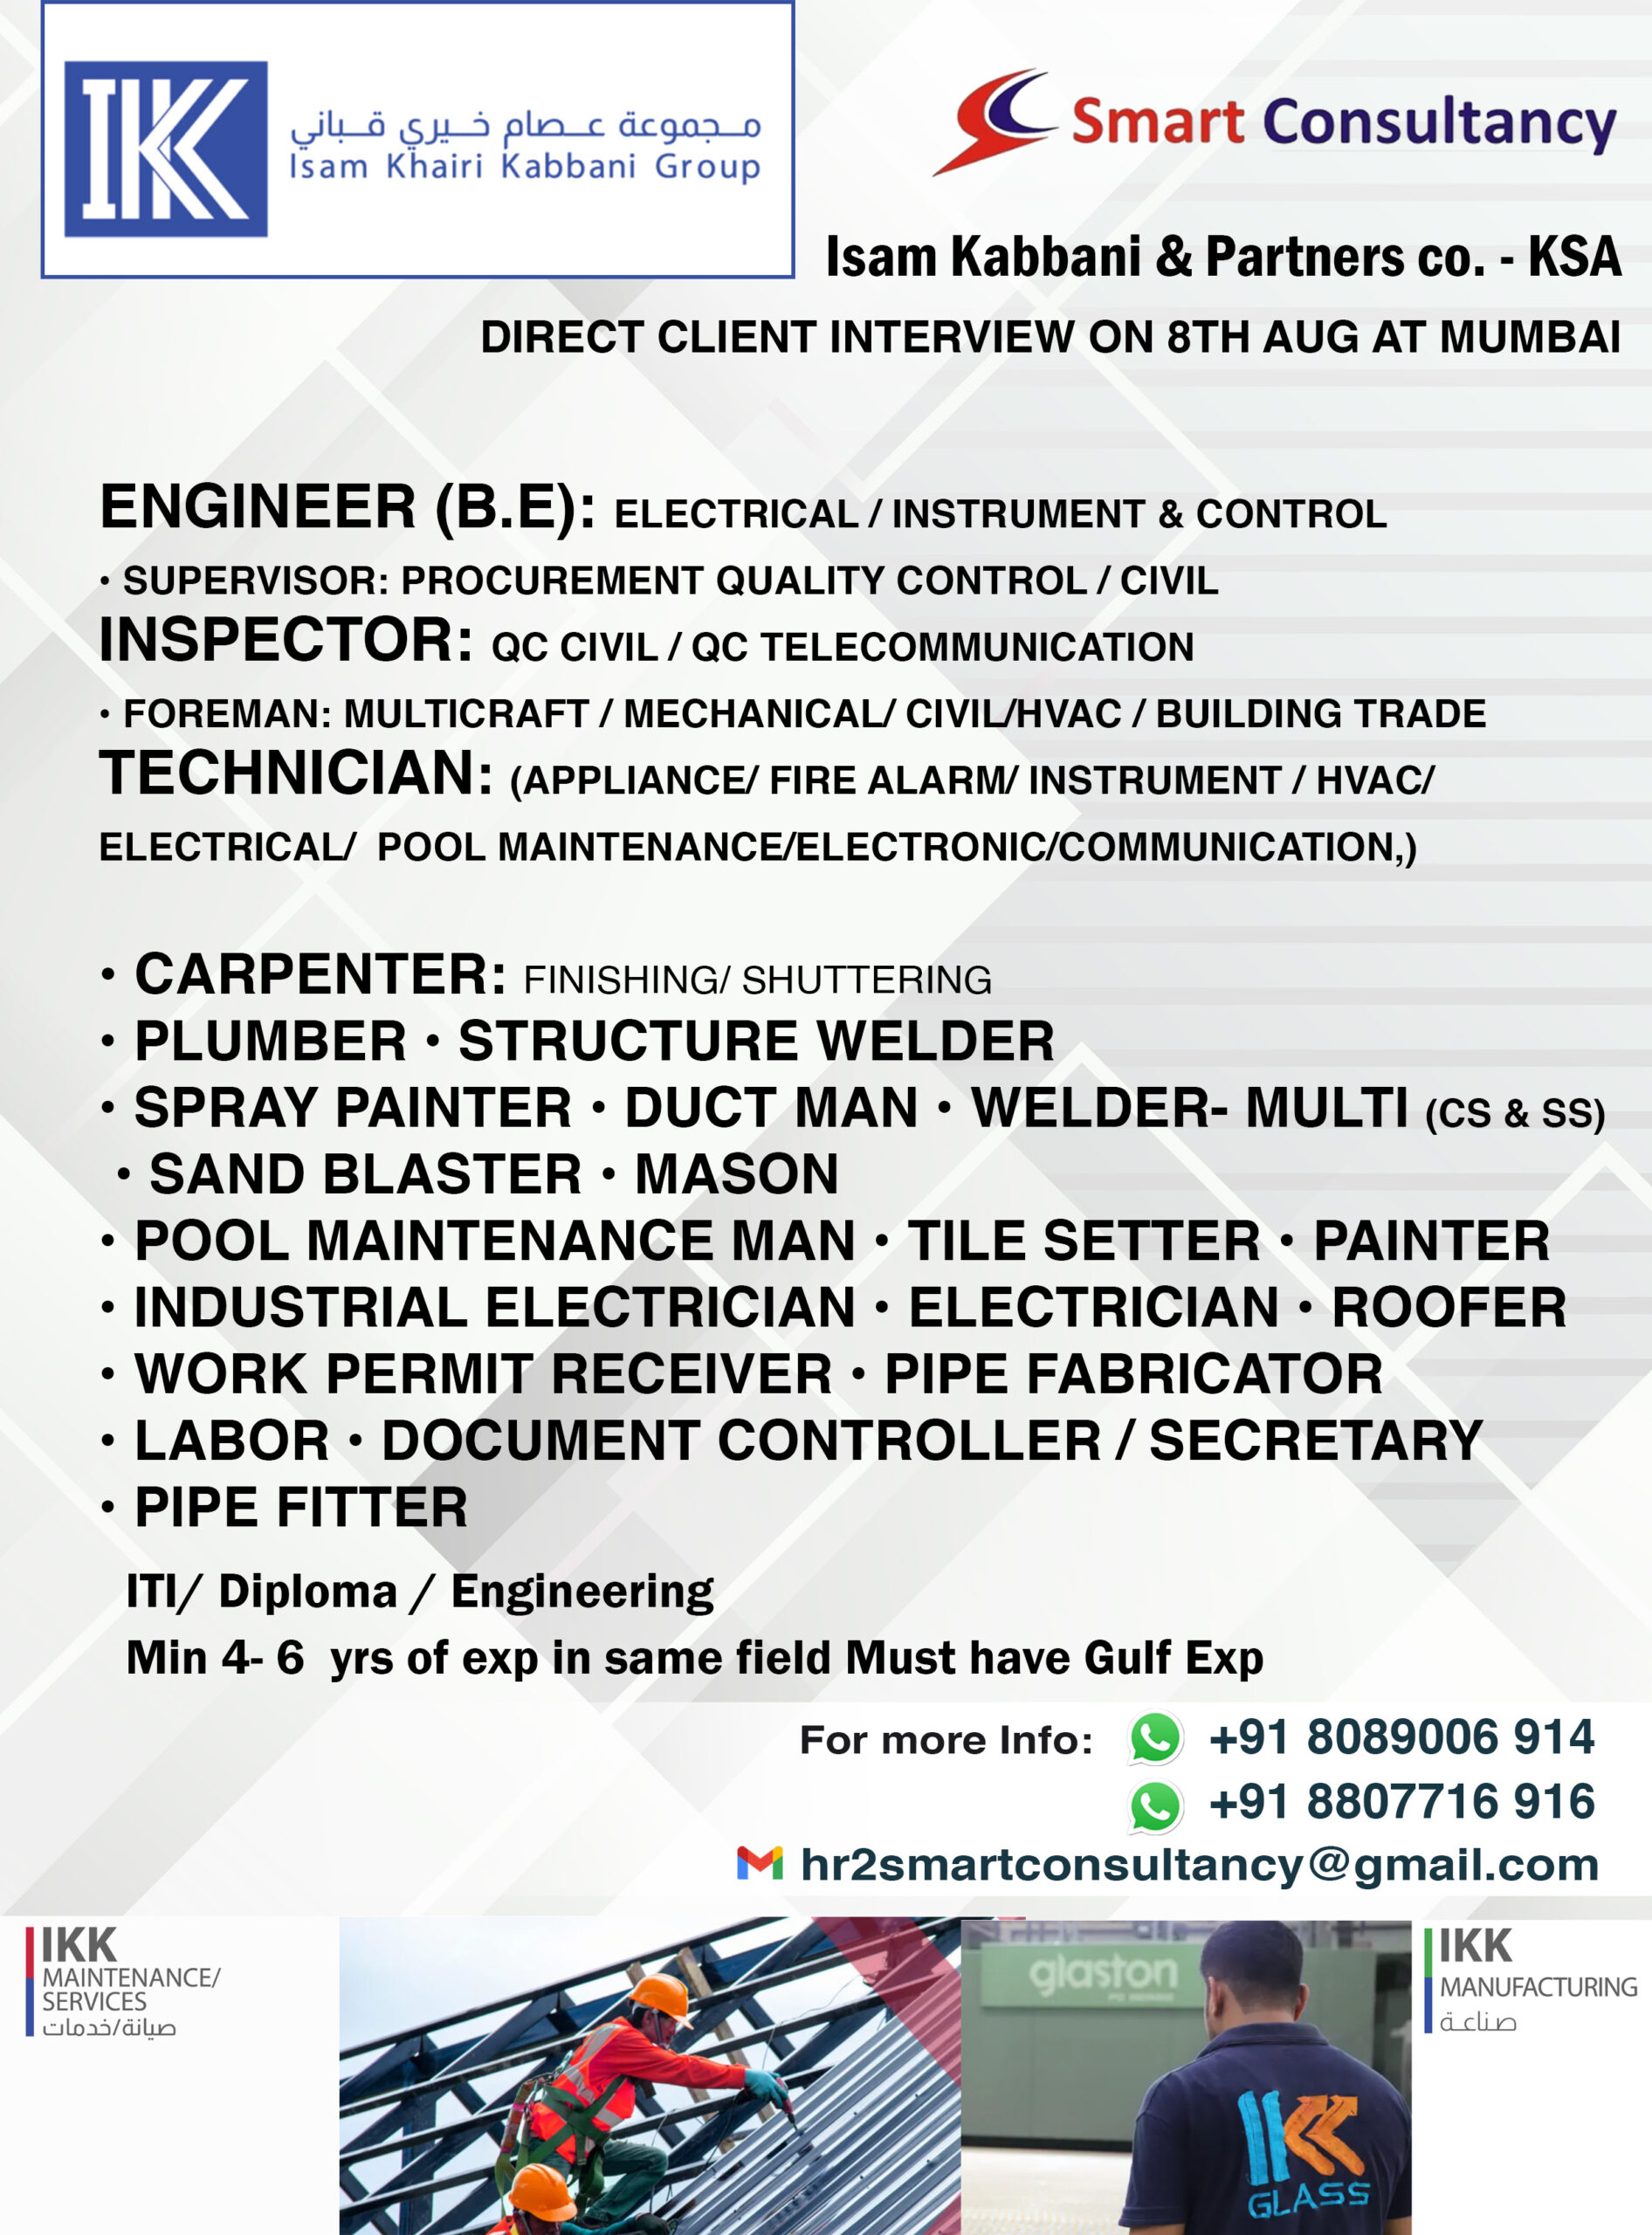 DIRECT CLIENT INTERVIEW ON 8TH AUGUST AT MUMBAI– ISAM KABBANI & PARTNERS Co. KSA